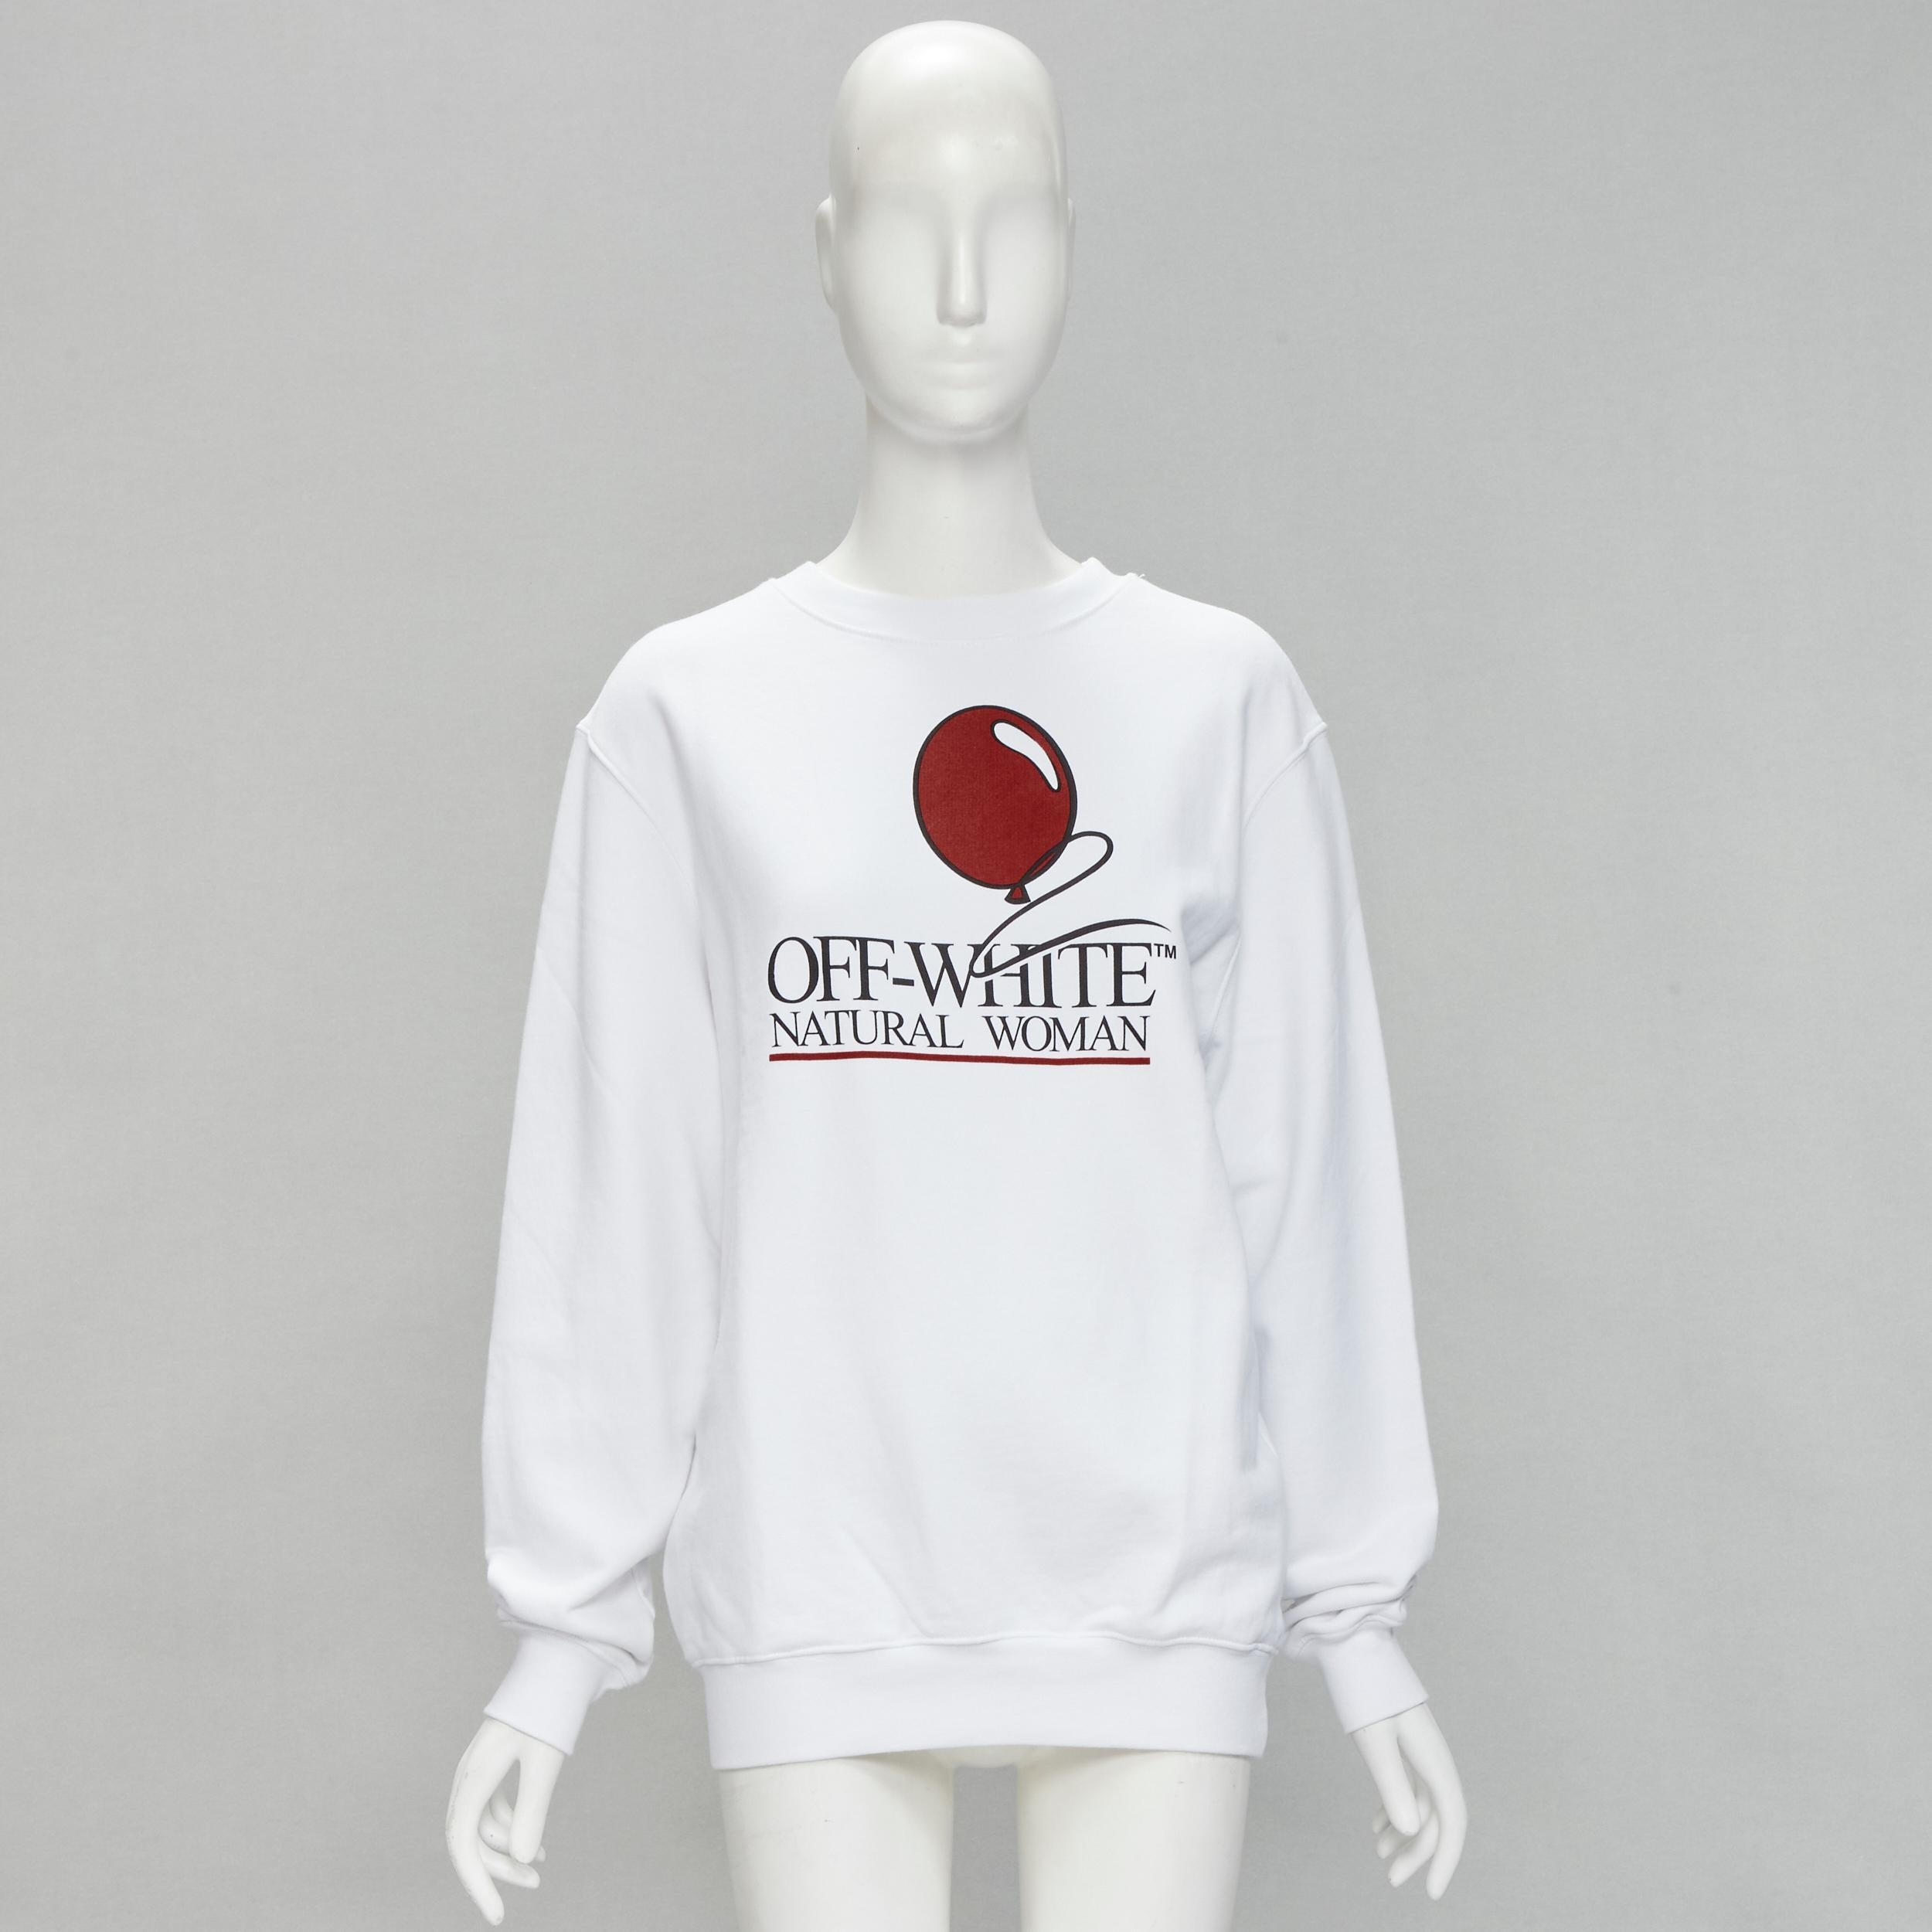 OFF WHITE Virgil Abloh Natural Woman red balloOn print embroidery sweatshirt M 2